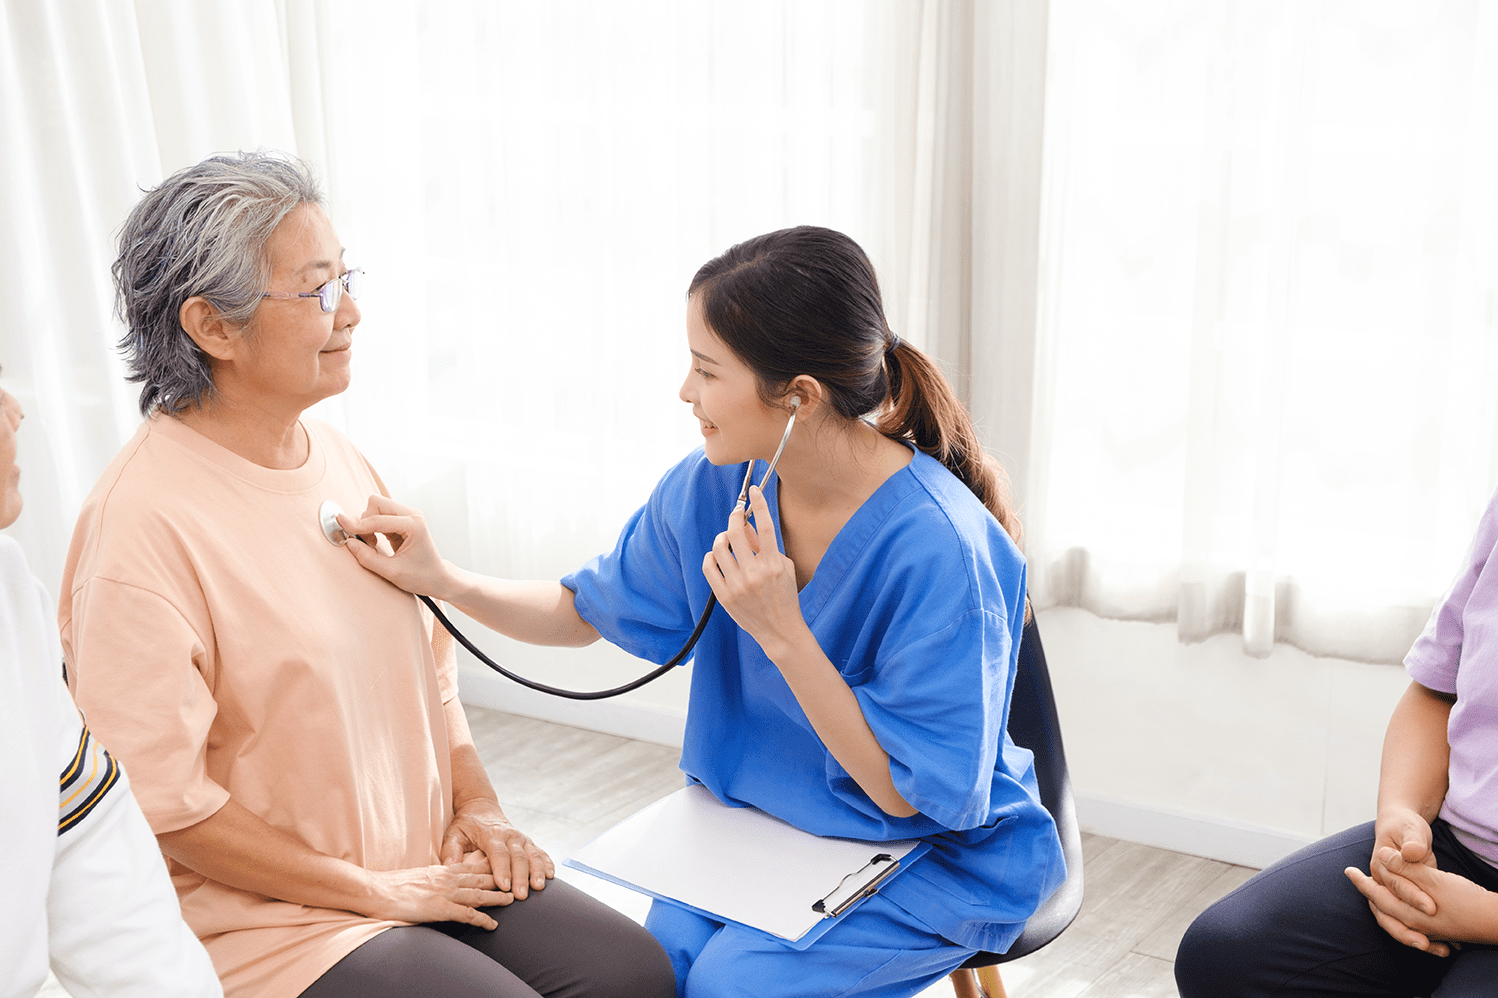 Lady in blue nurse's overalls taking heart beat reading of lady in dusty pink t-shirt using a stethoscope